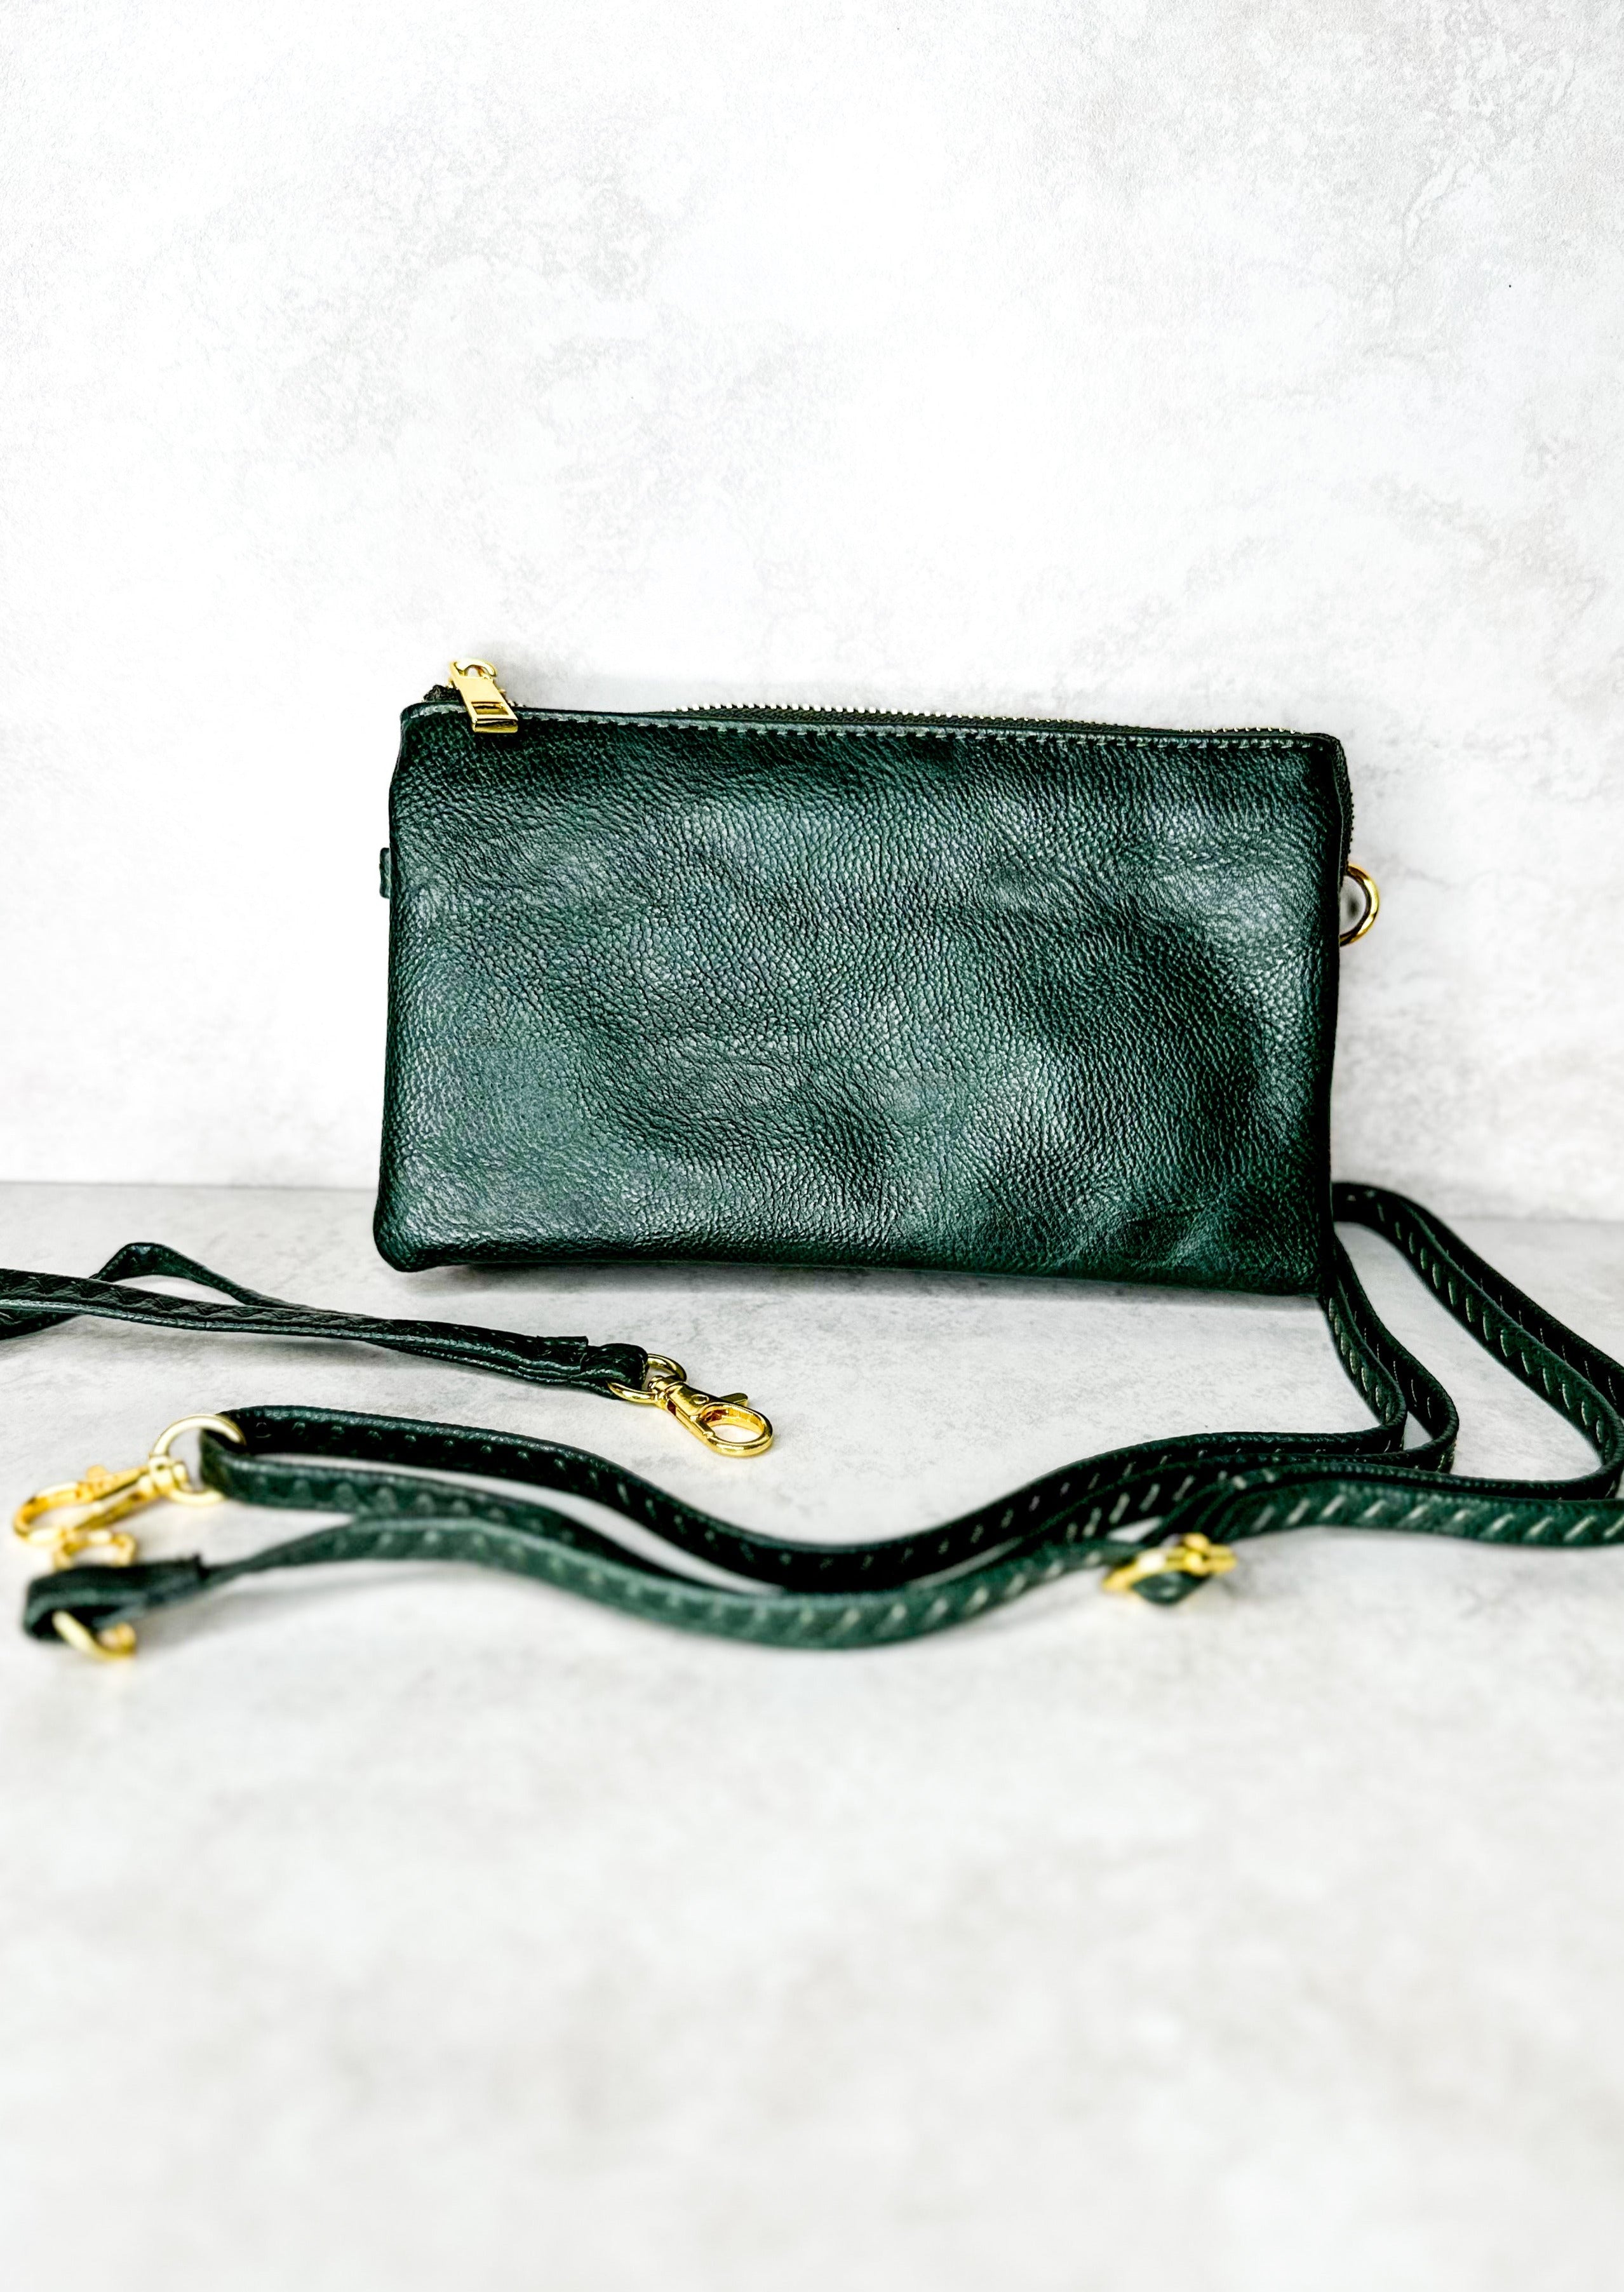 Crossbody bag with zipper, gold hardware, pockets inside, comes with wrist strap and shoulder strap, both straps removable - dark green